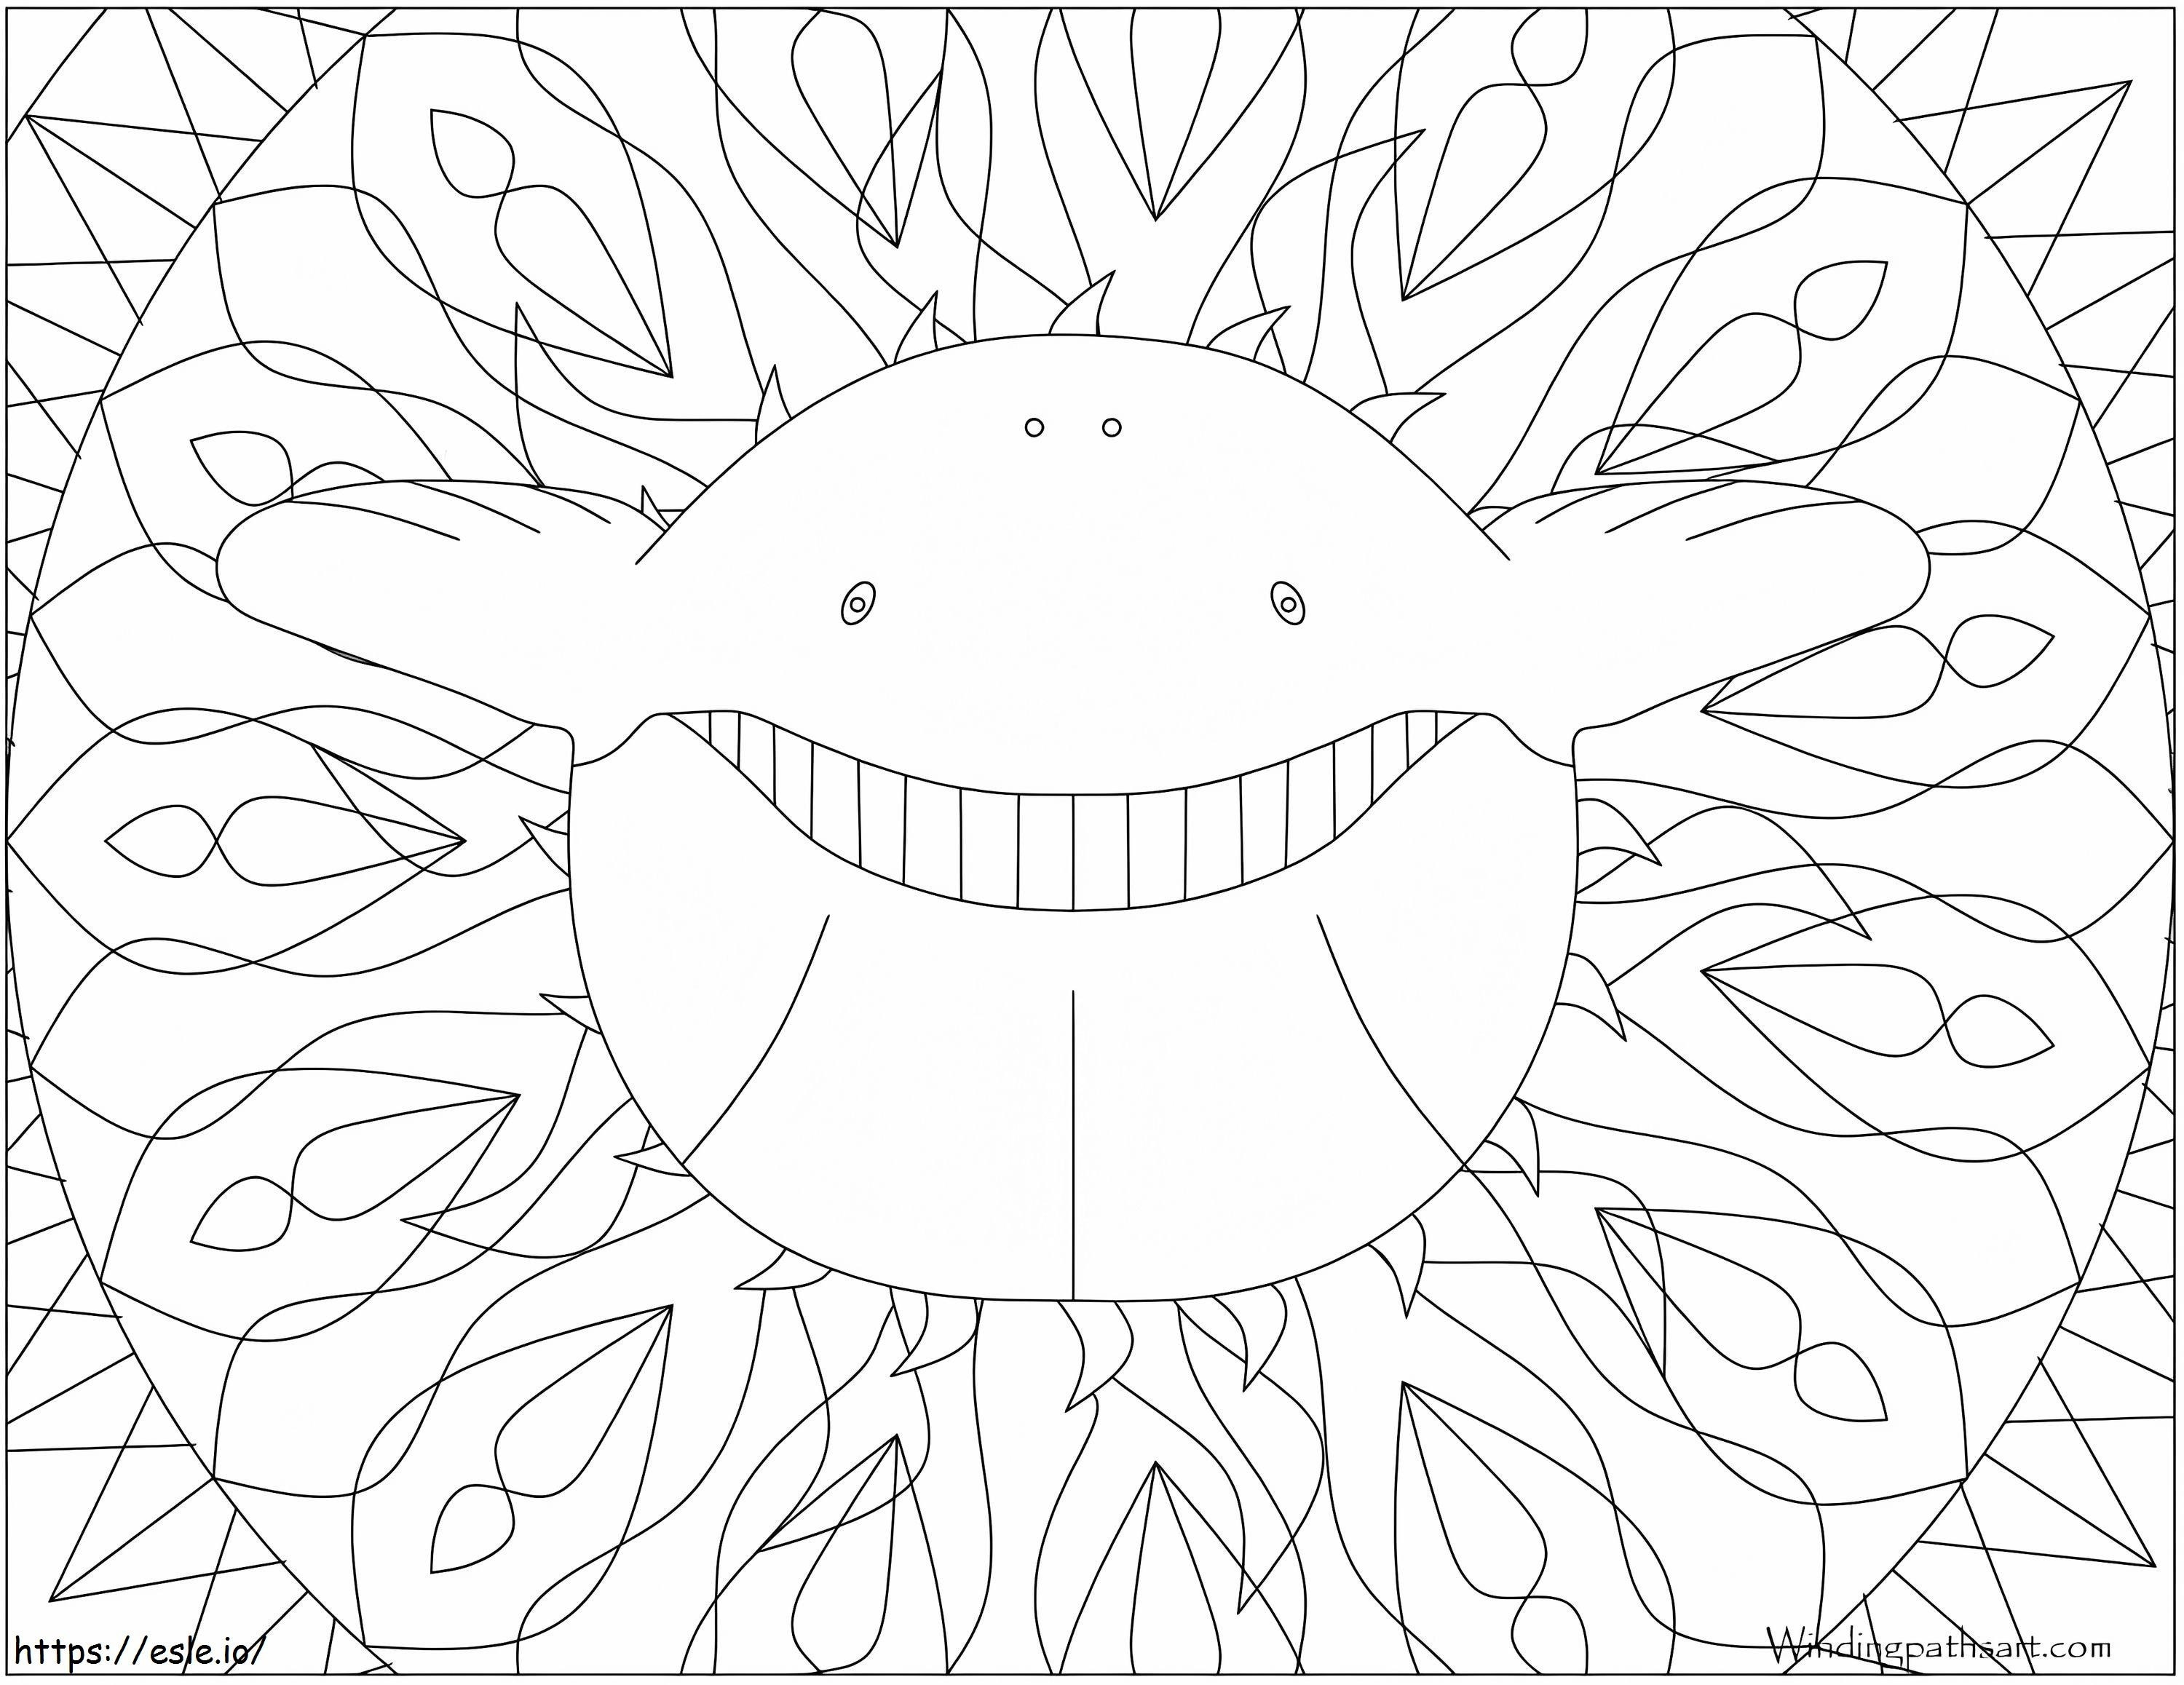 Wailord Pokemon 1 coloring page